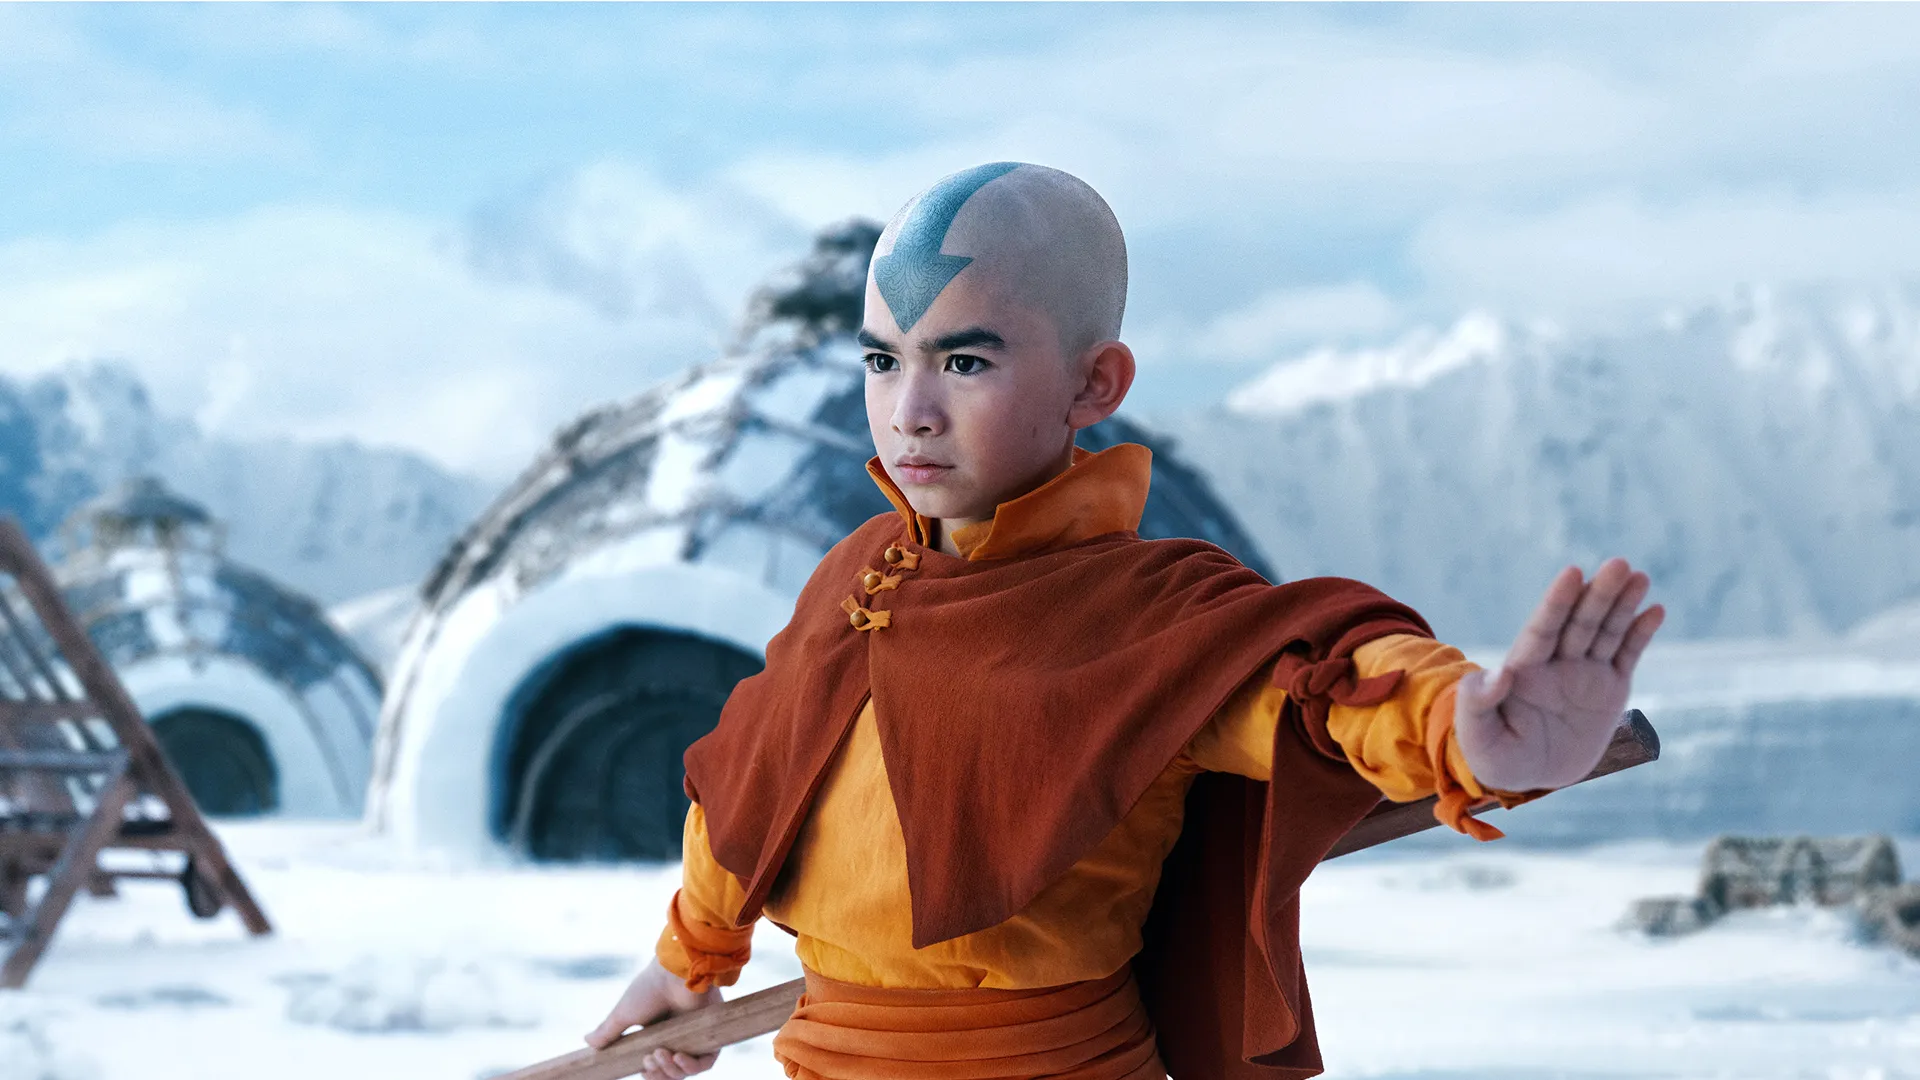 Avatar: The Last Airbender release date